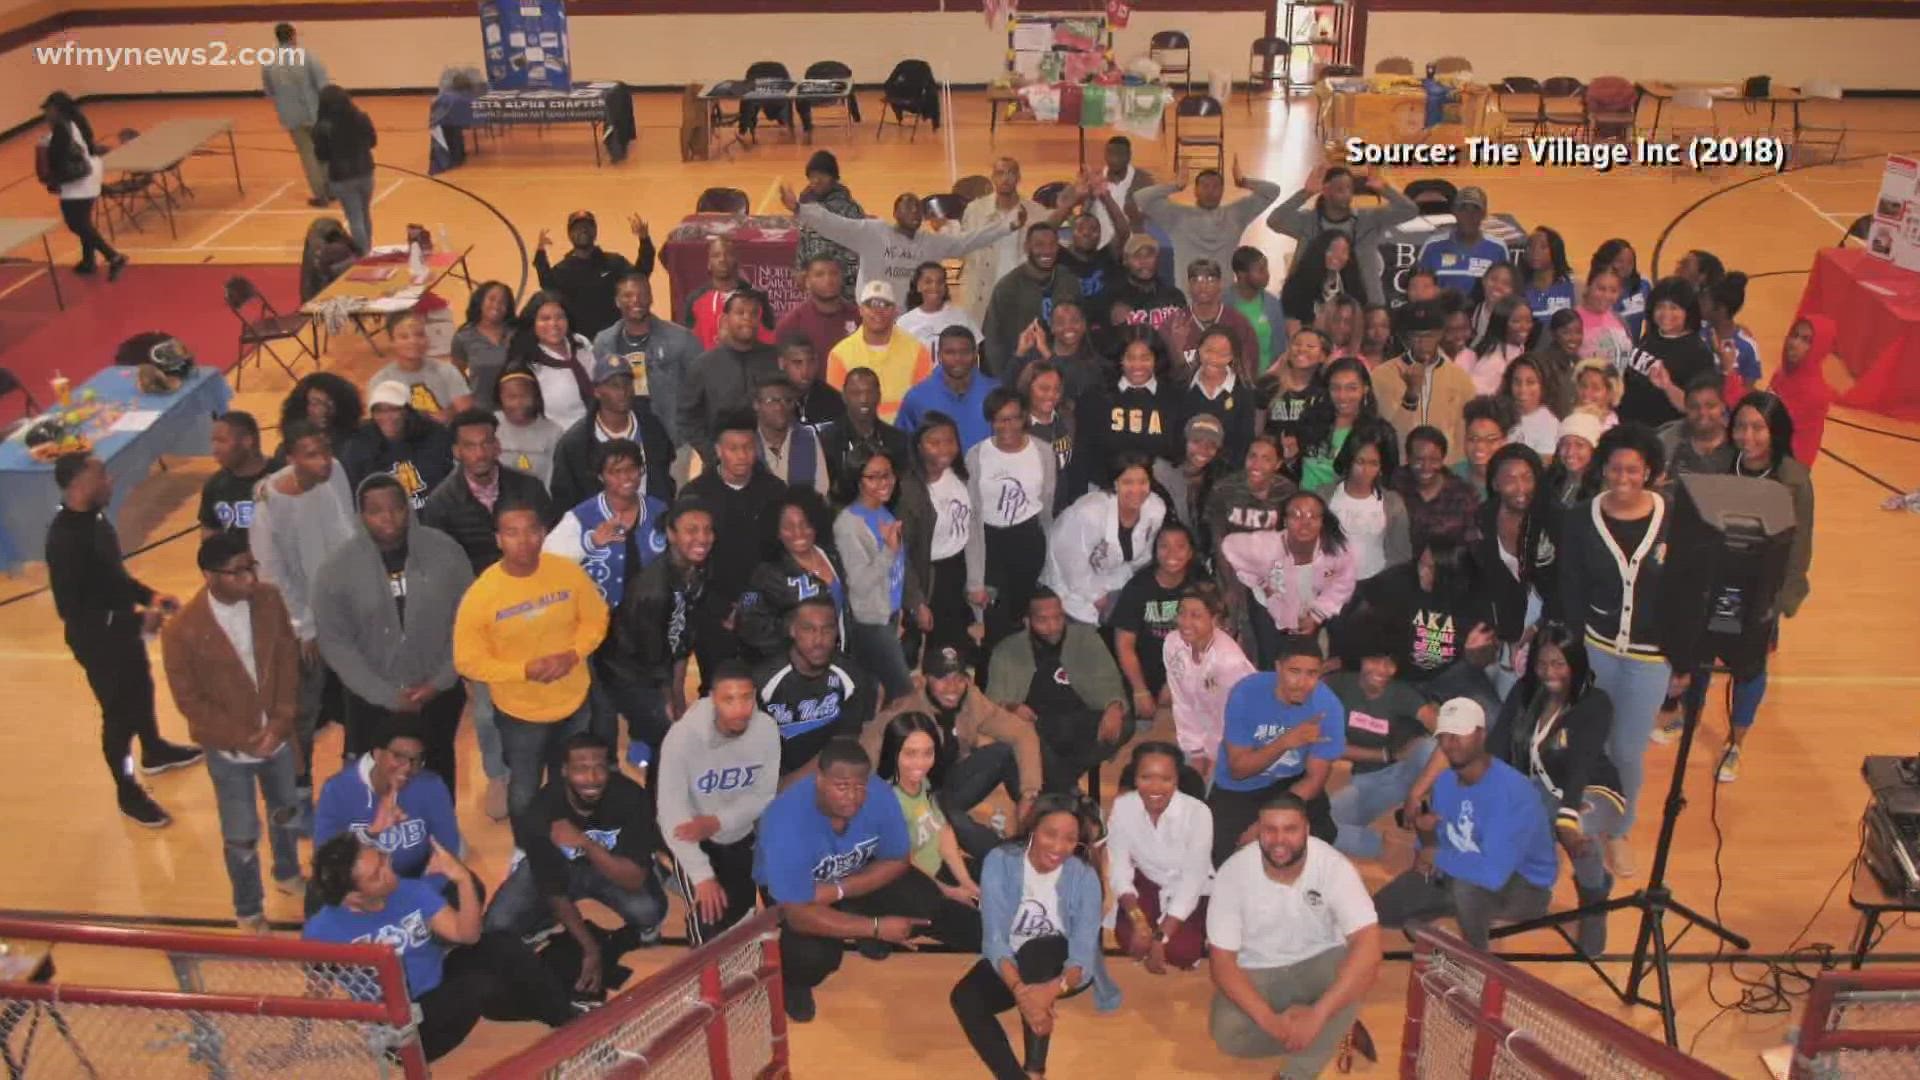 The Village Mentorship Inc. will host their 4th annual HBCU Day to connect kids to college resources.